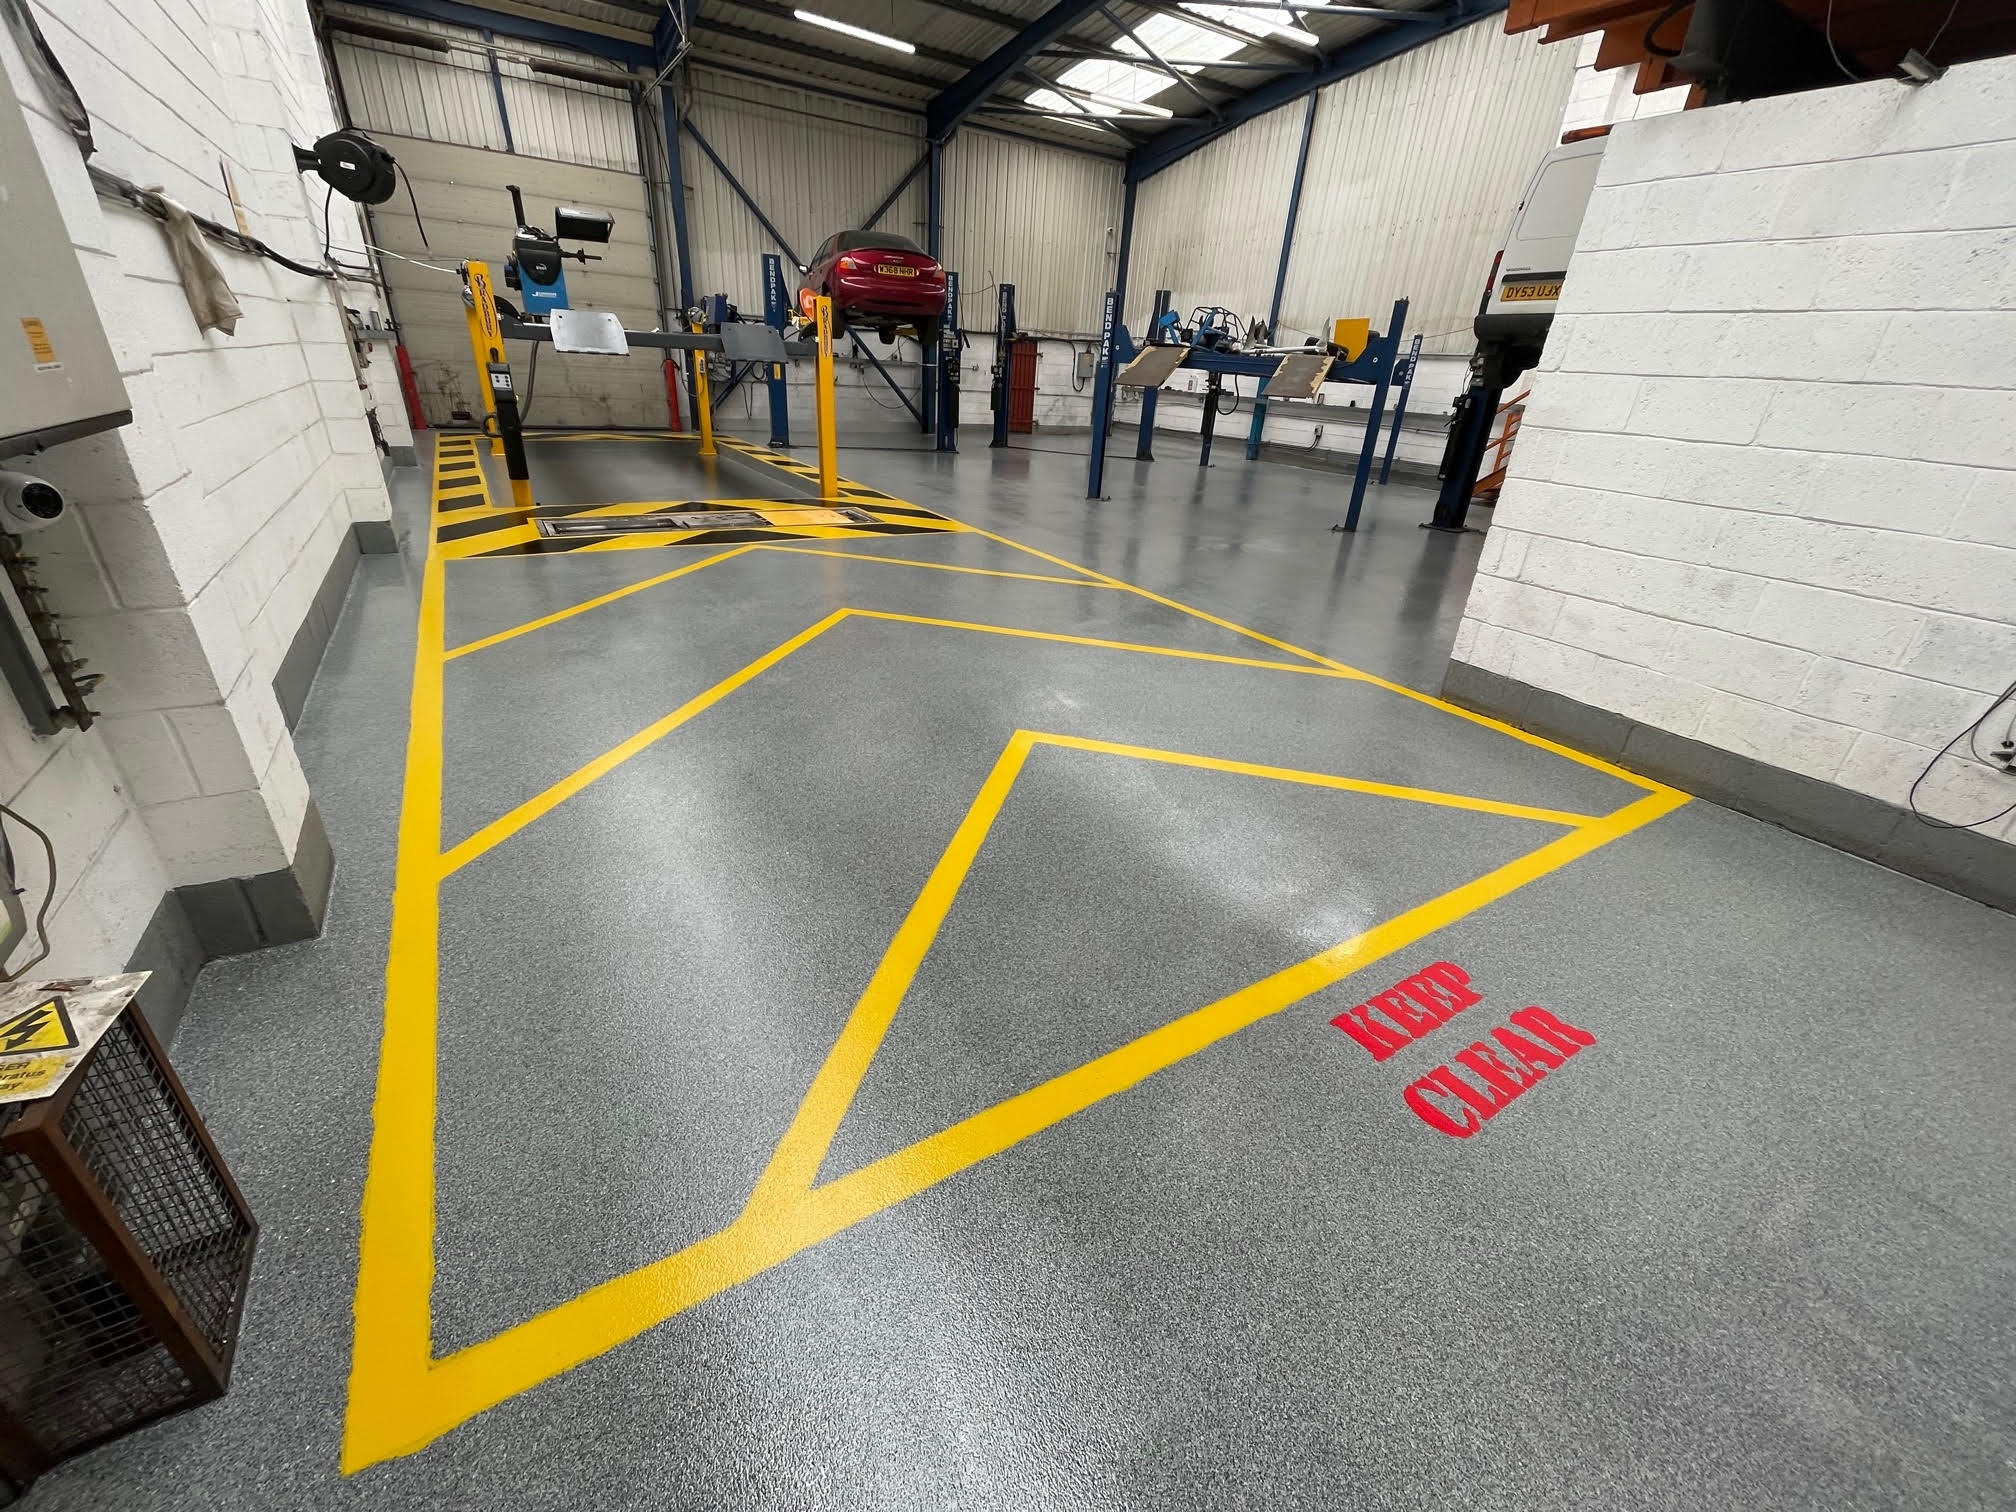 A car garage workshop that went with resin flooring for their business which is perfect for this industry.